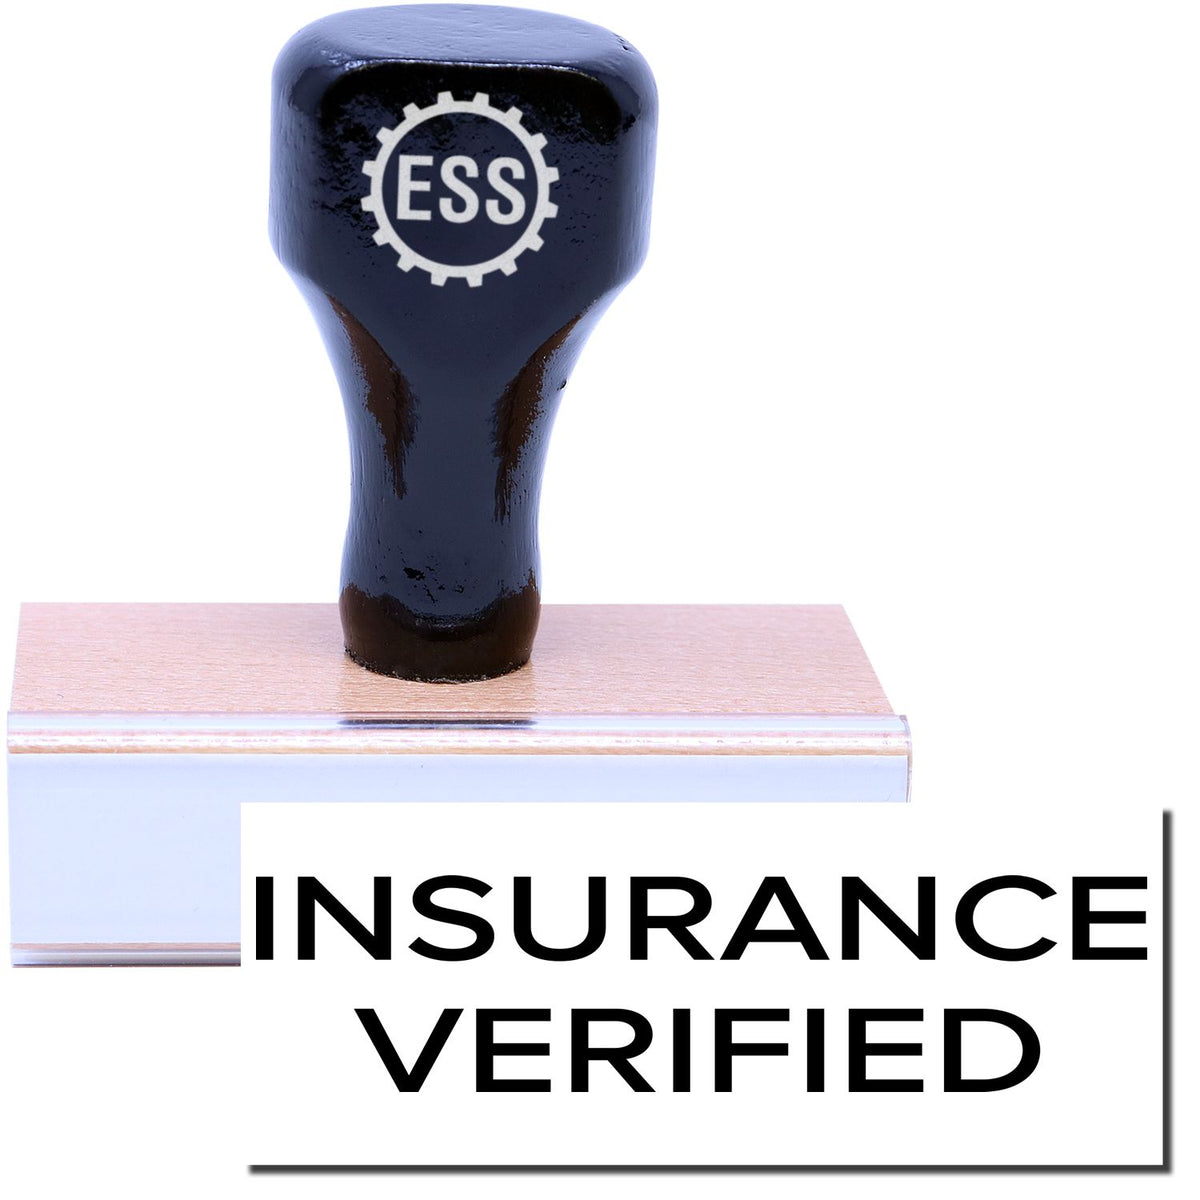 A stock office rubber stamp with a stamped image showing how the text &quot;INSURANCE VERIFIED&quot; in a narrow font is displayed after stamping.